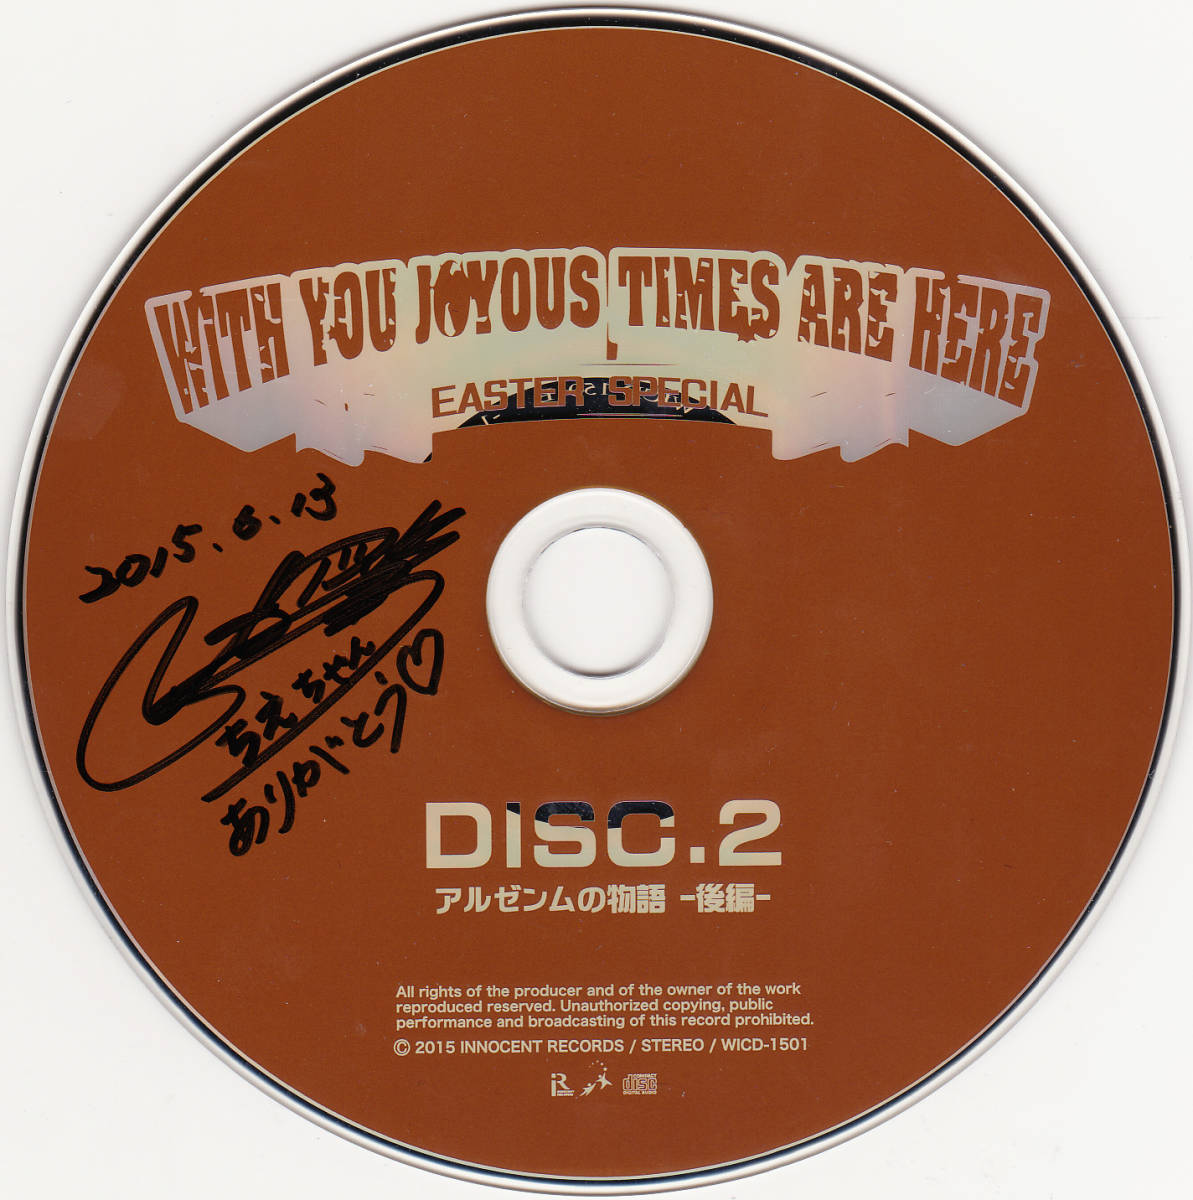 ◆3CD EASTER SPECIAL♪With You Joyous Times Are Here★帯付★サイン入り_画像4